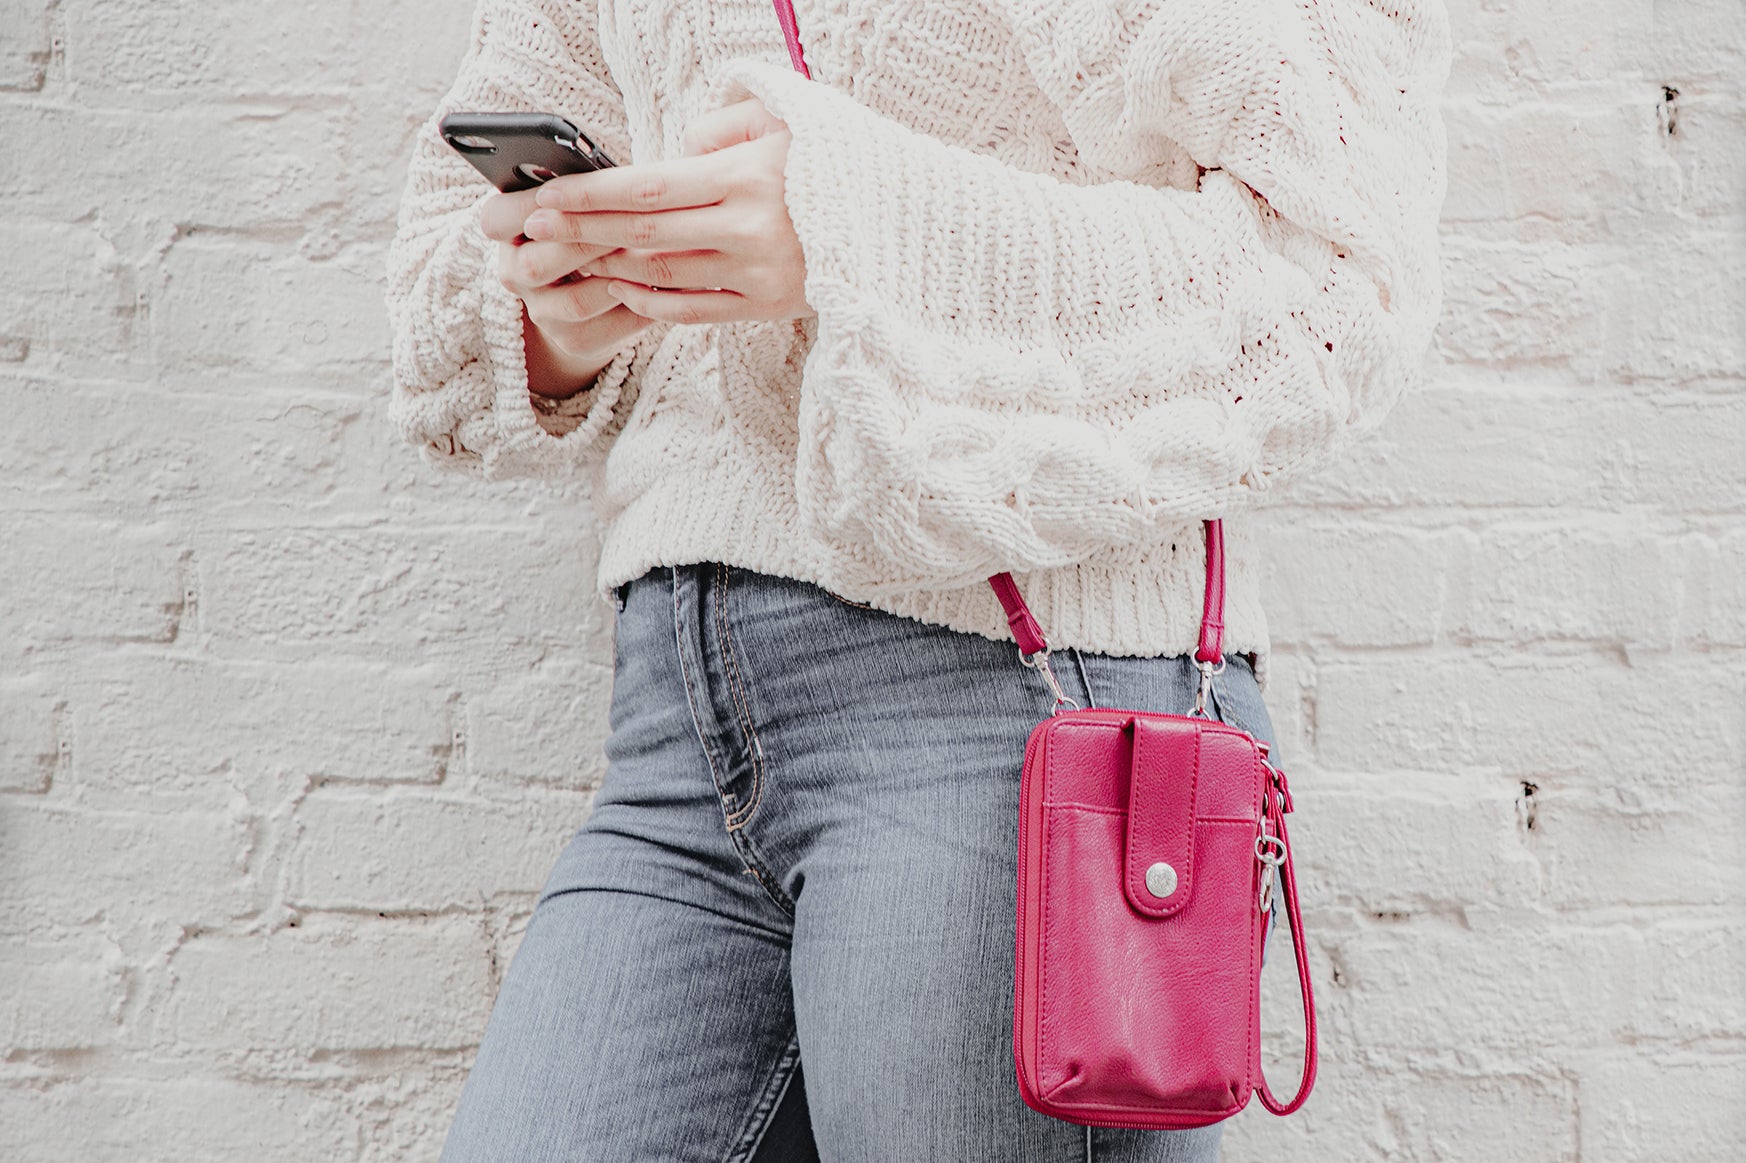 The Perfect Bags for Your Phone - A woman in a white sweater and jeans hangs her pink Jacqui Cell phone bag over her shoulder as she goes hands free and looks up something on her phone. 